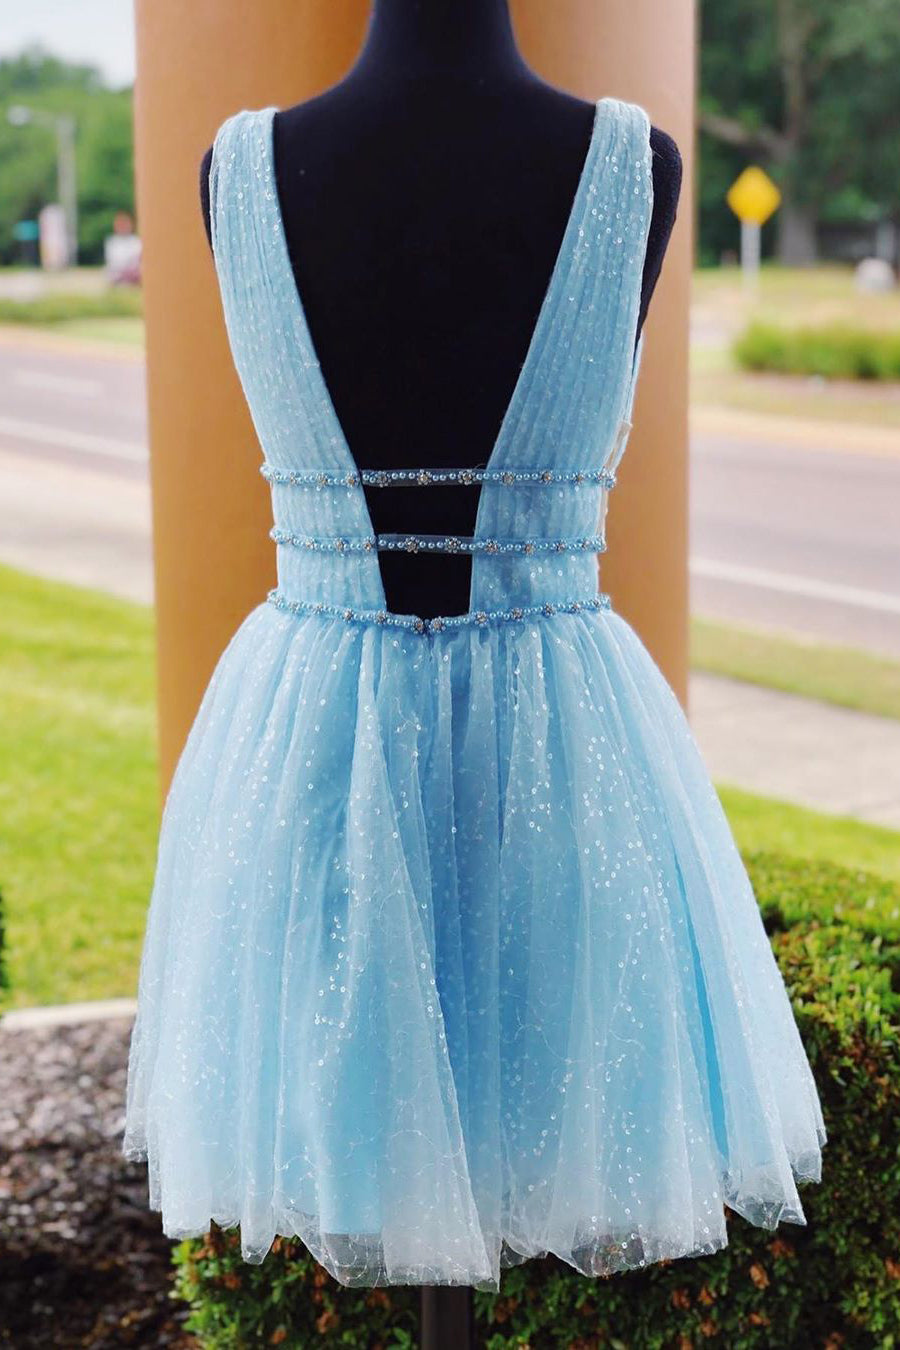 Party Dresses Black And Gold, Sparkling Beading Sky Blue Homecoming Dress